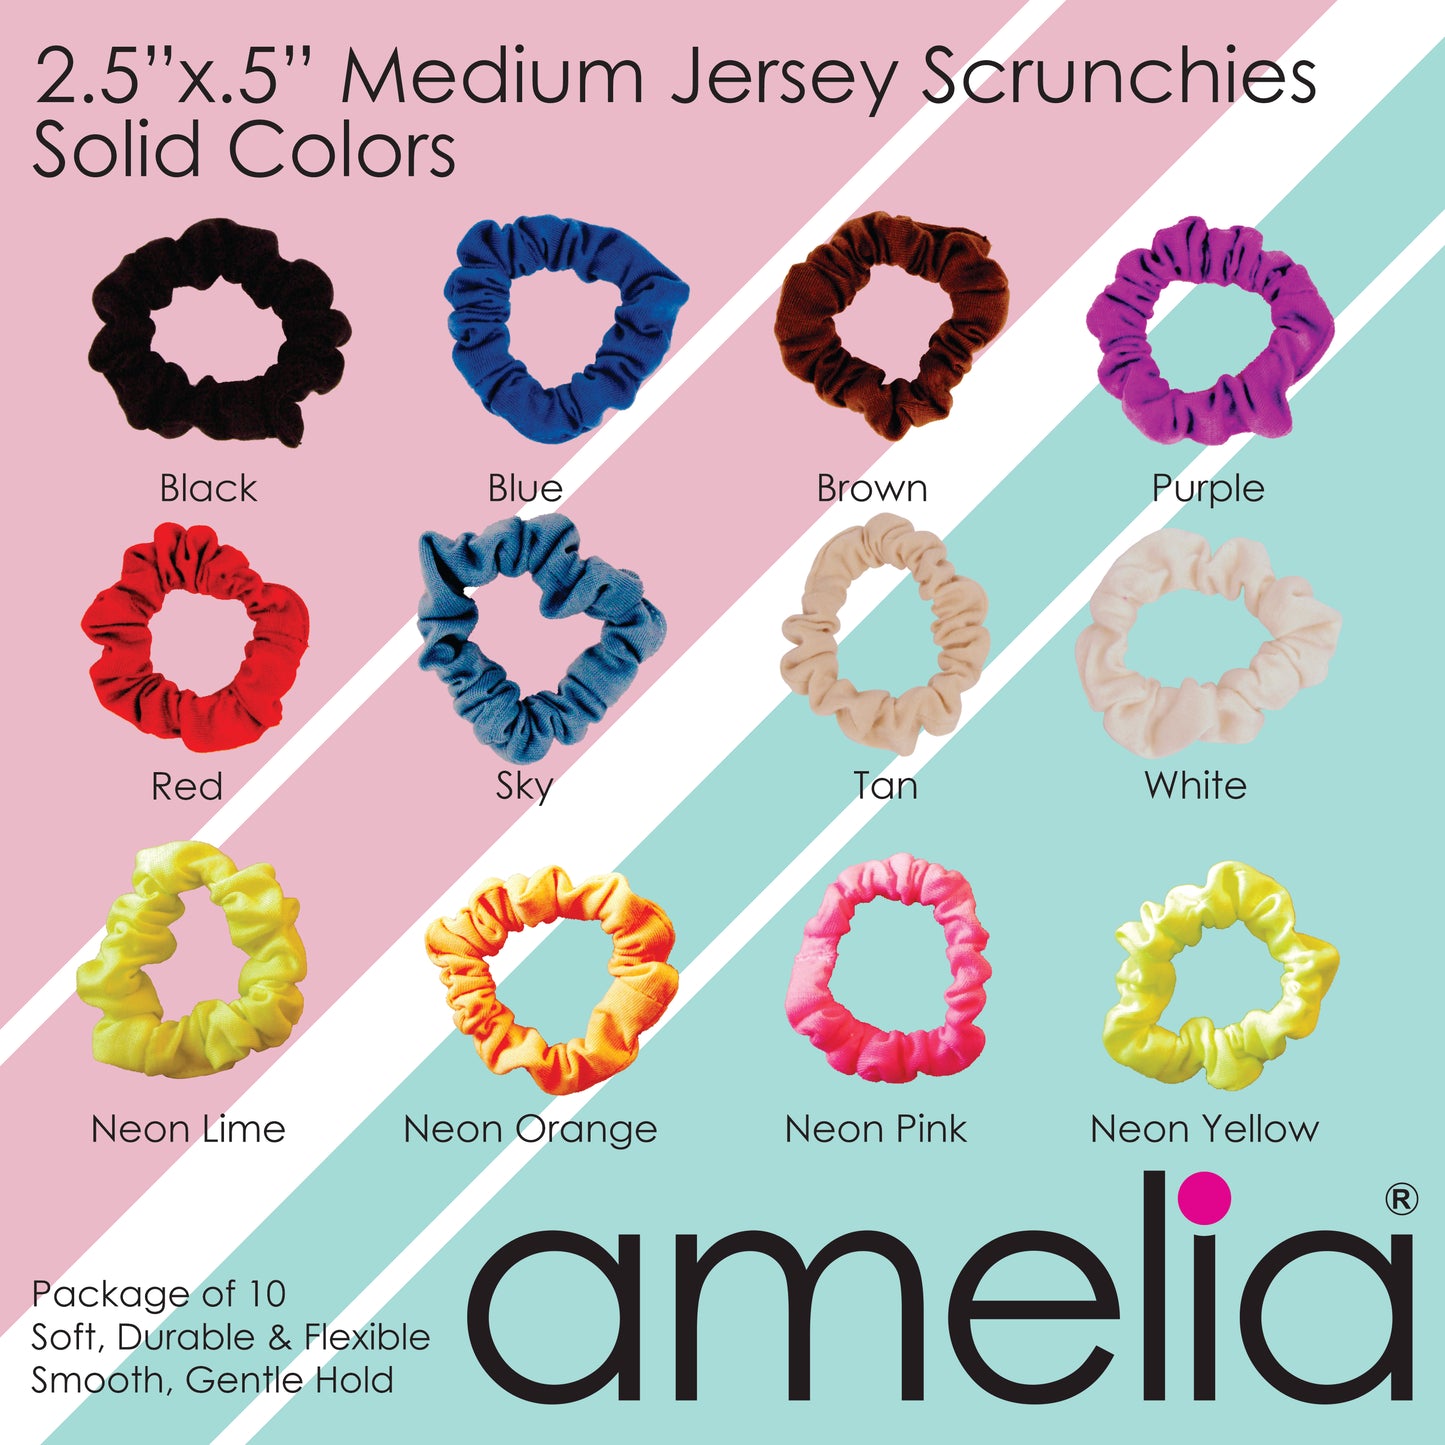 Amelia Beauty, Medium Neon Orange Jersey Scrunchies, 2.5in Diameter, Gentle on Hair, Strong Hold, No Snag, No Dents or Creases. 10 Pack